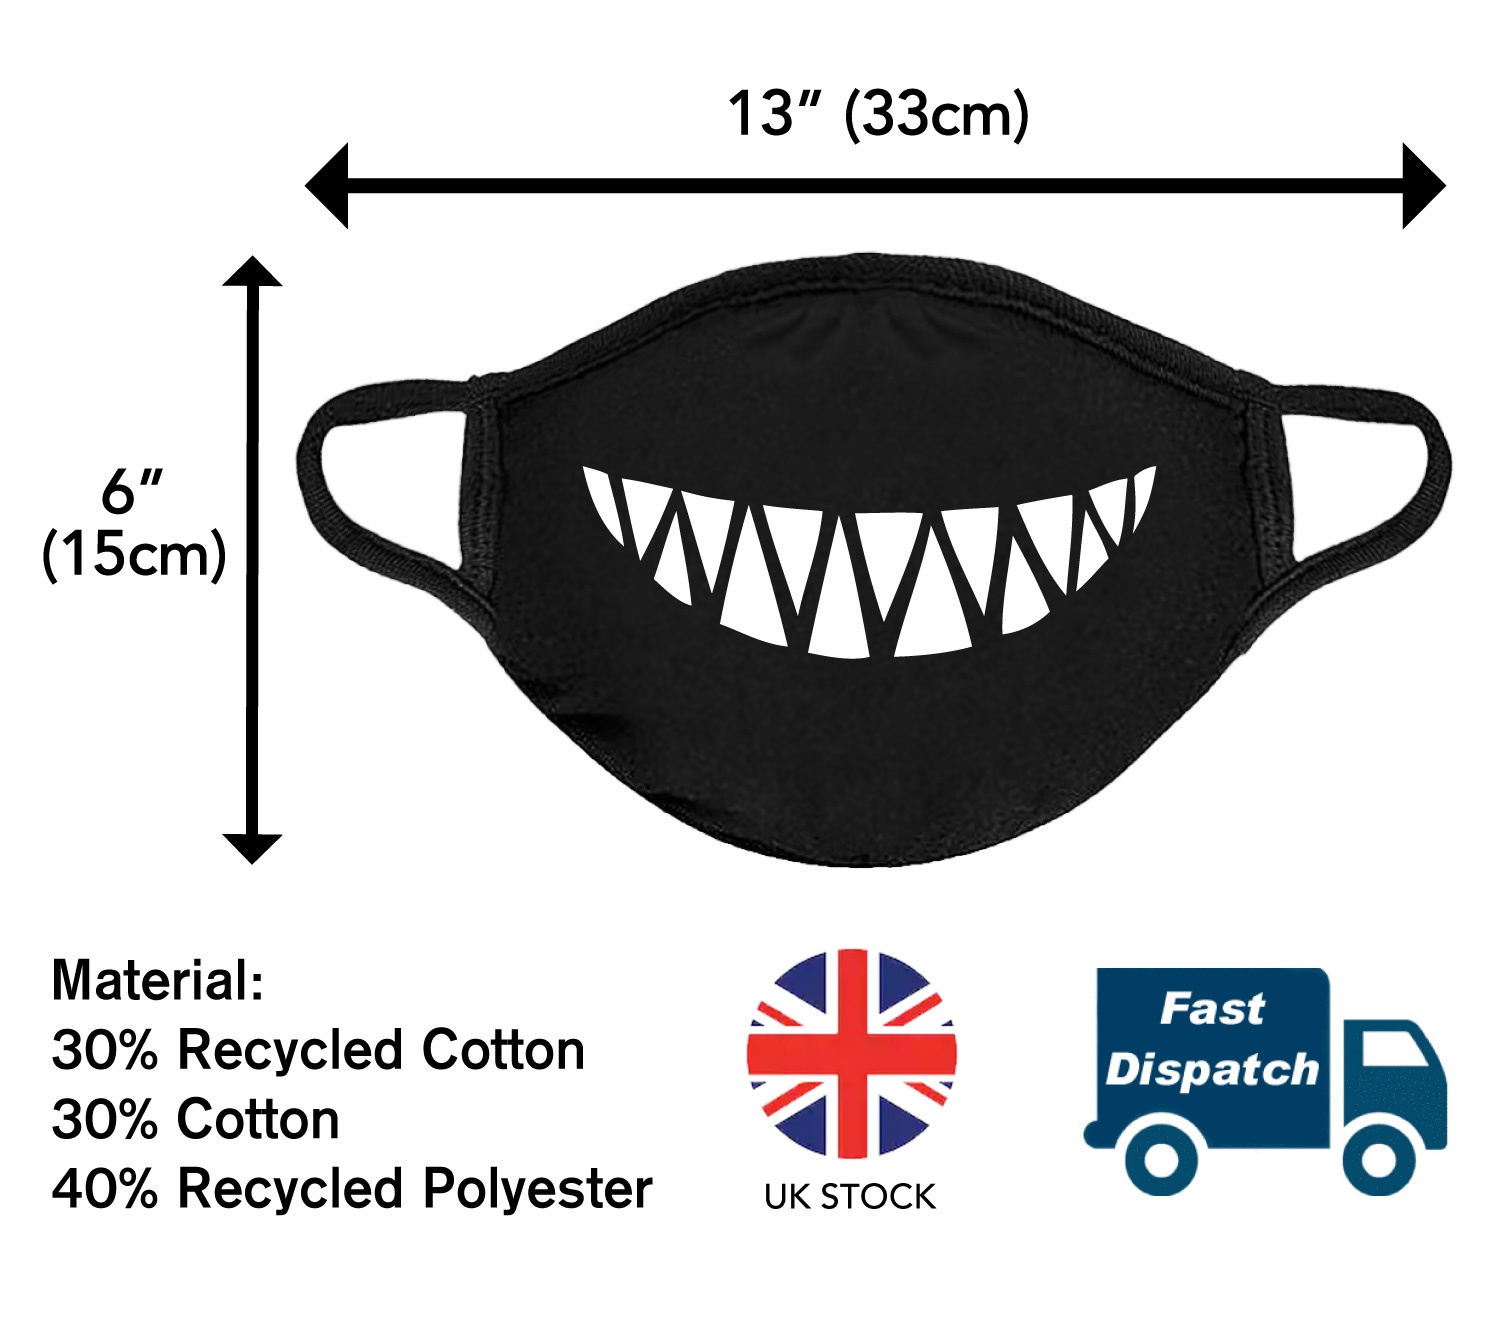 Smile Teeth Face Mask Adult Covering Fun Black Washable Reusable